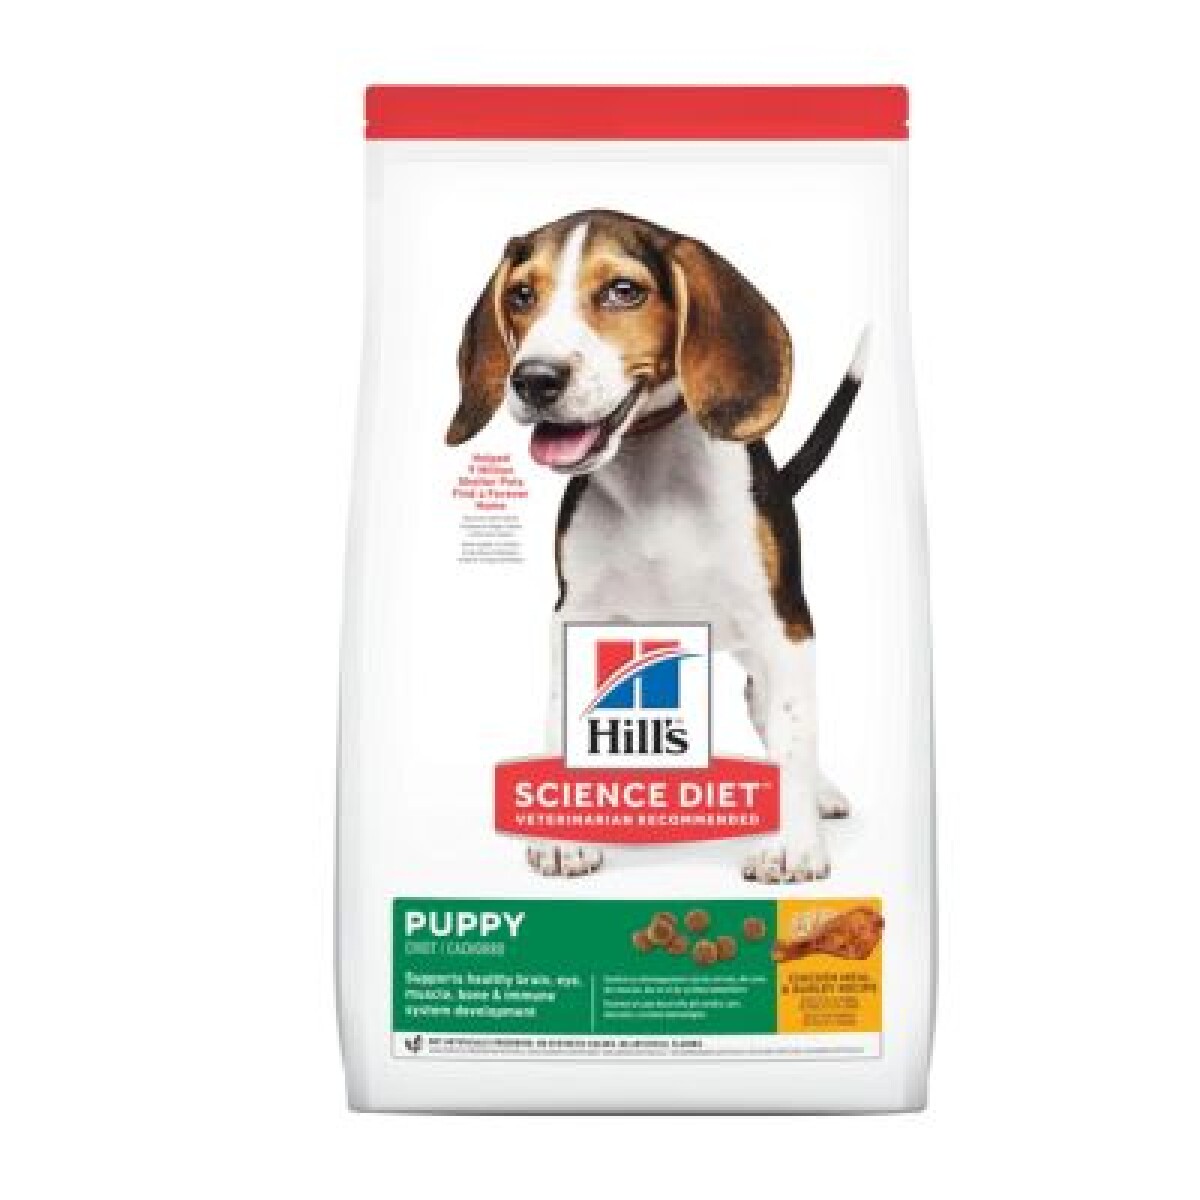 HILLS CANINE PUPPY 2.04 KG - Unica 